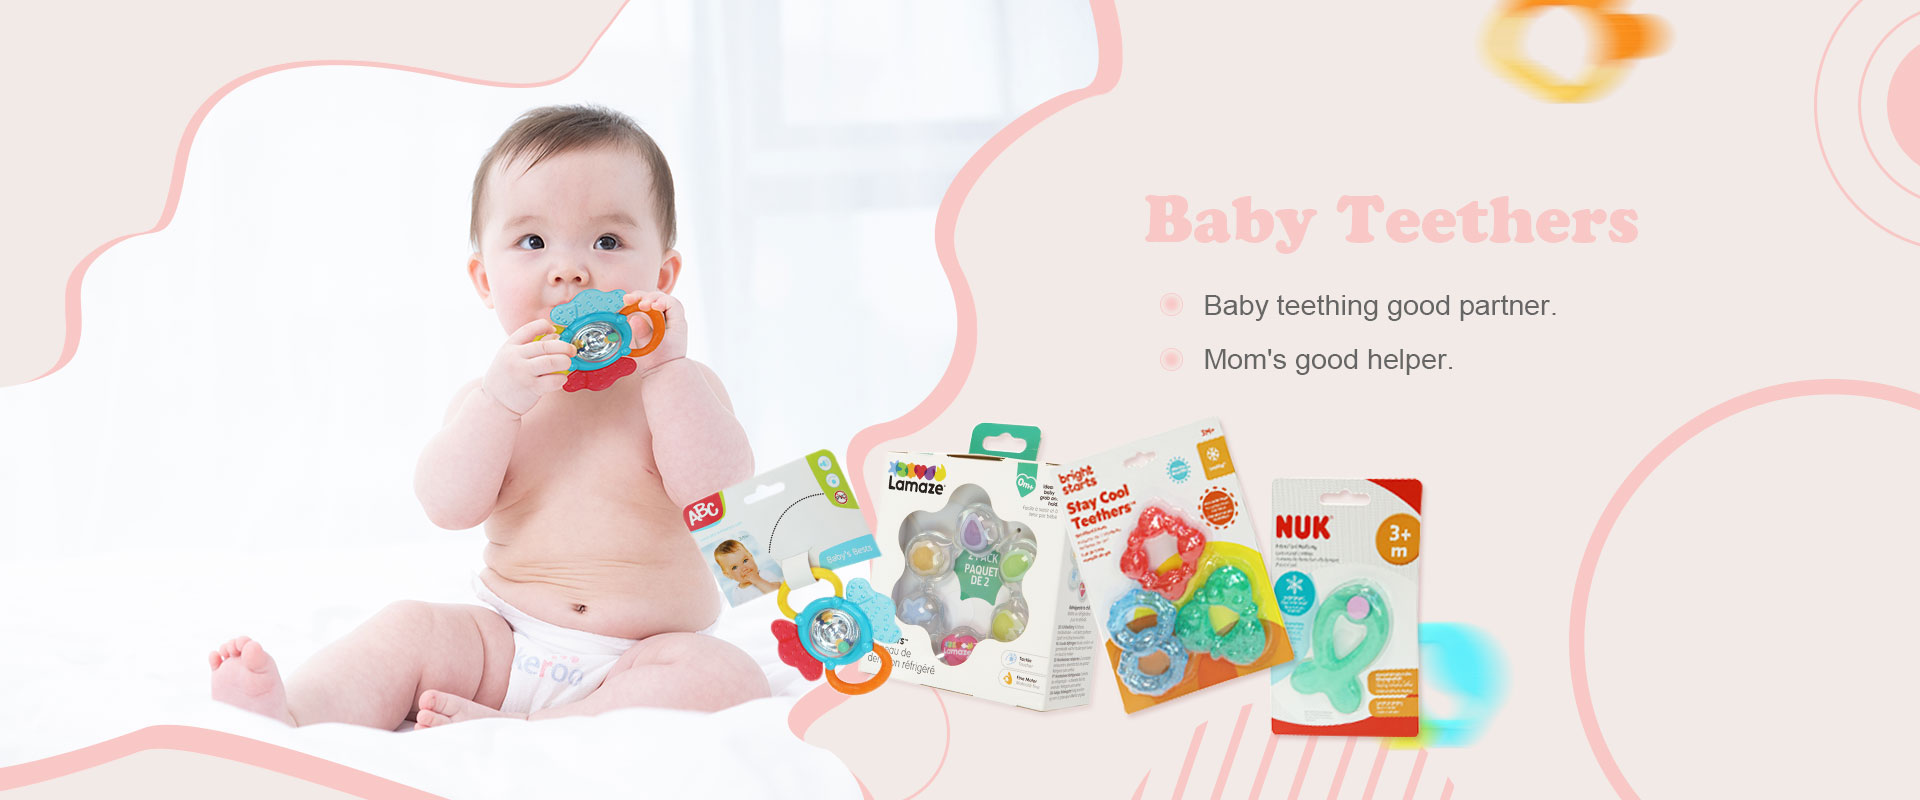 Baby Teethers Manufacturer